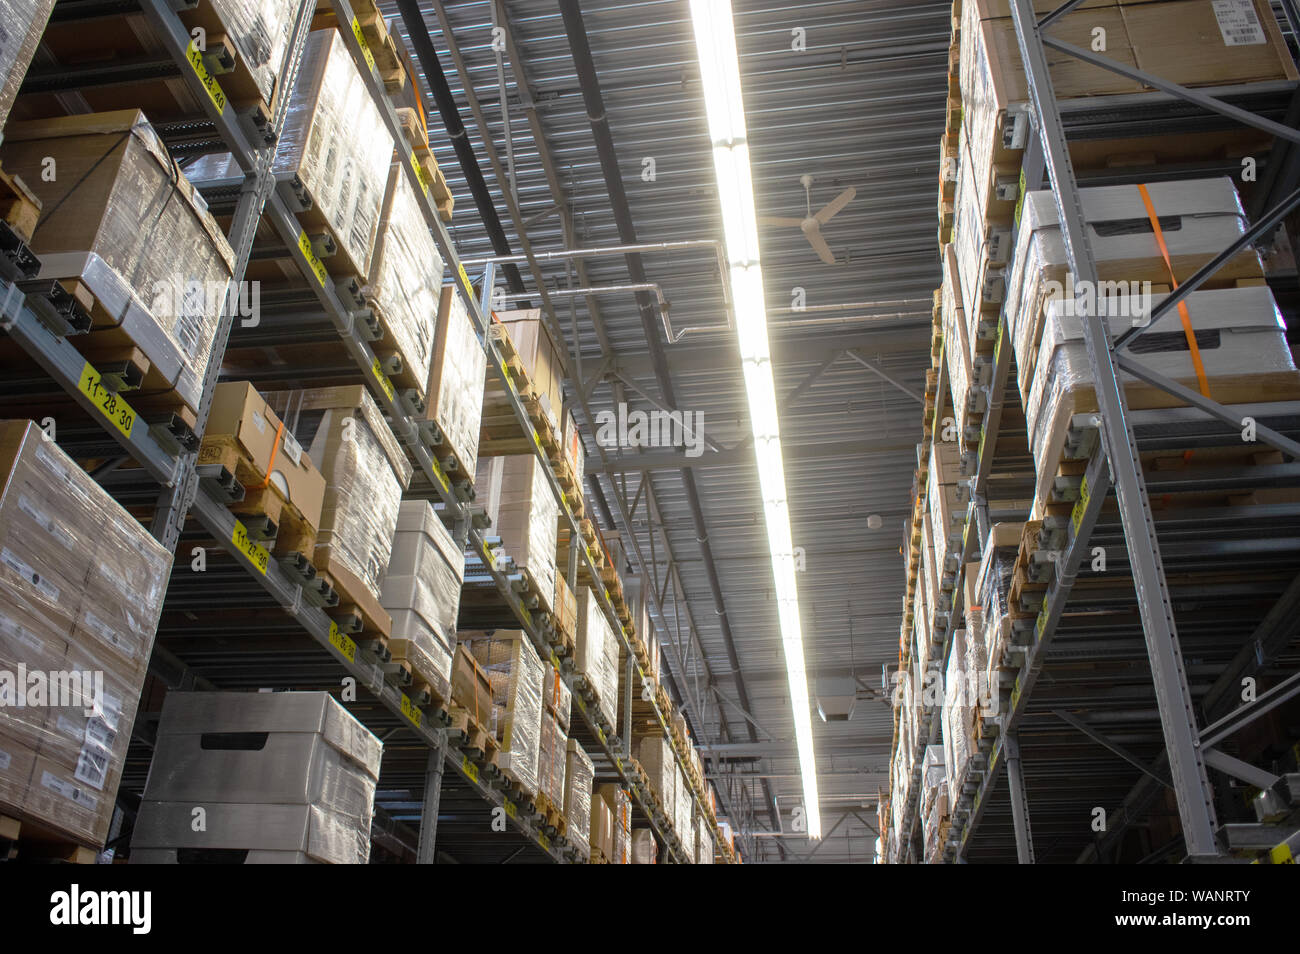 duiven netherlands may 24 2019 ikea warehouse in the ikea store to pick up the purchased goods stock photo alamy